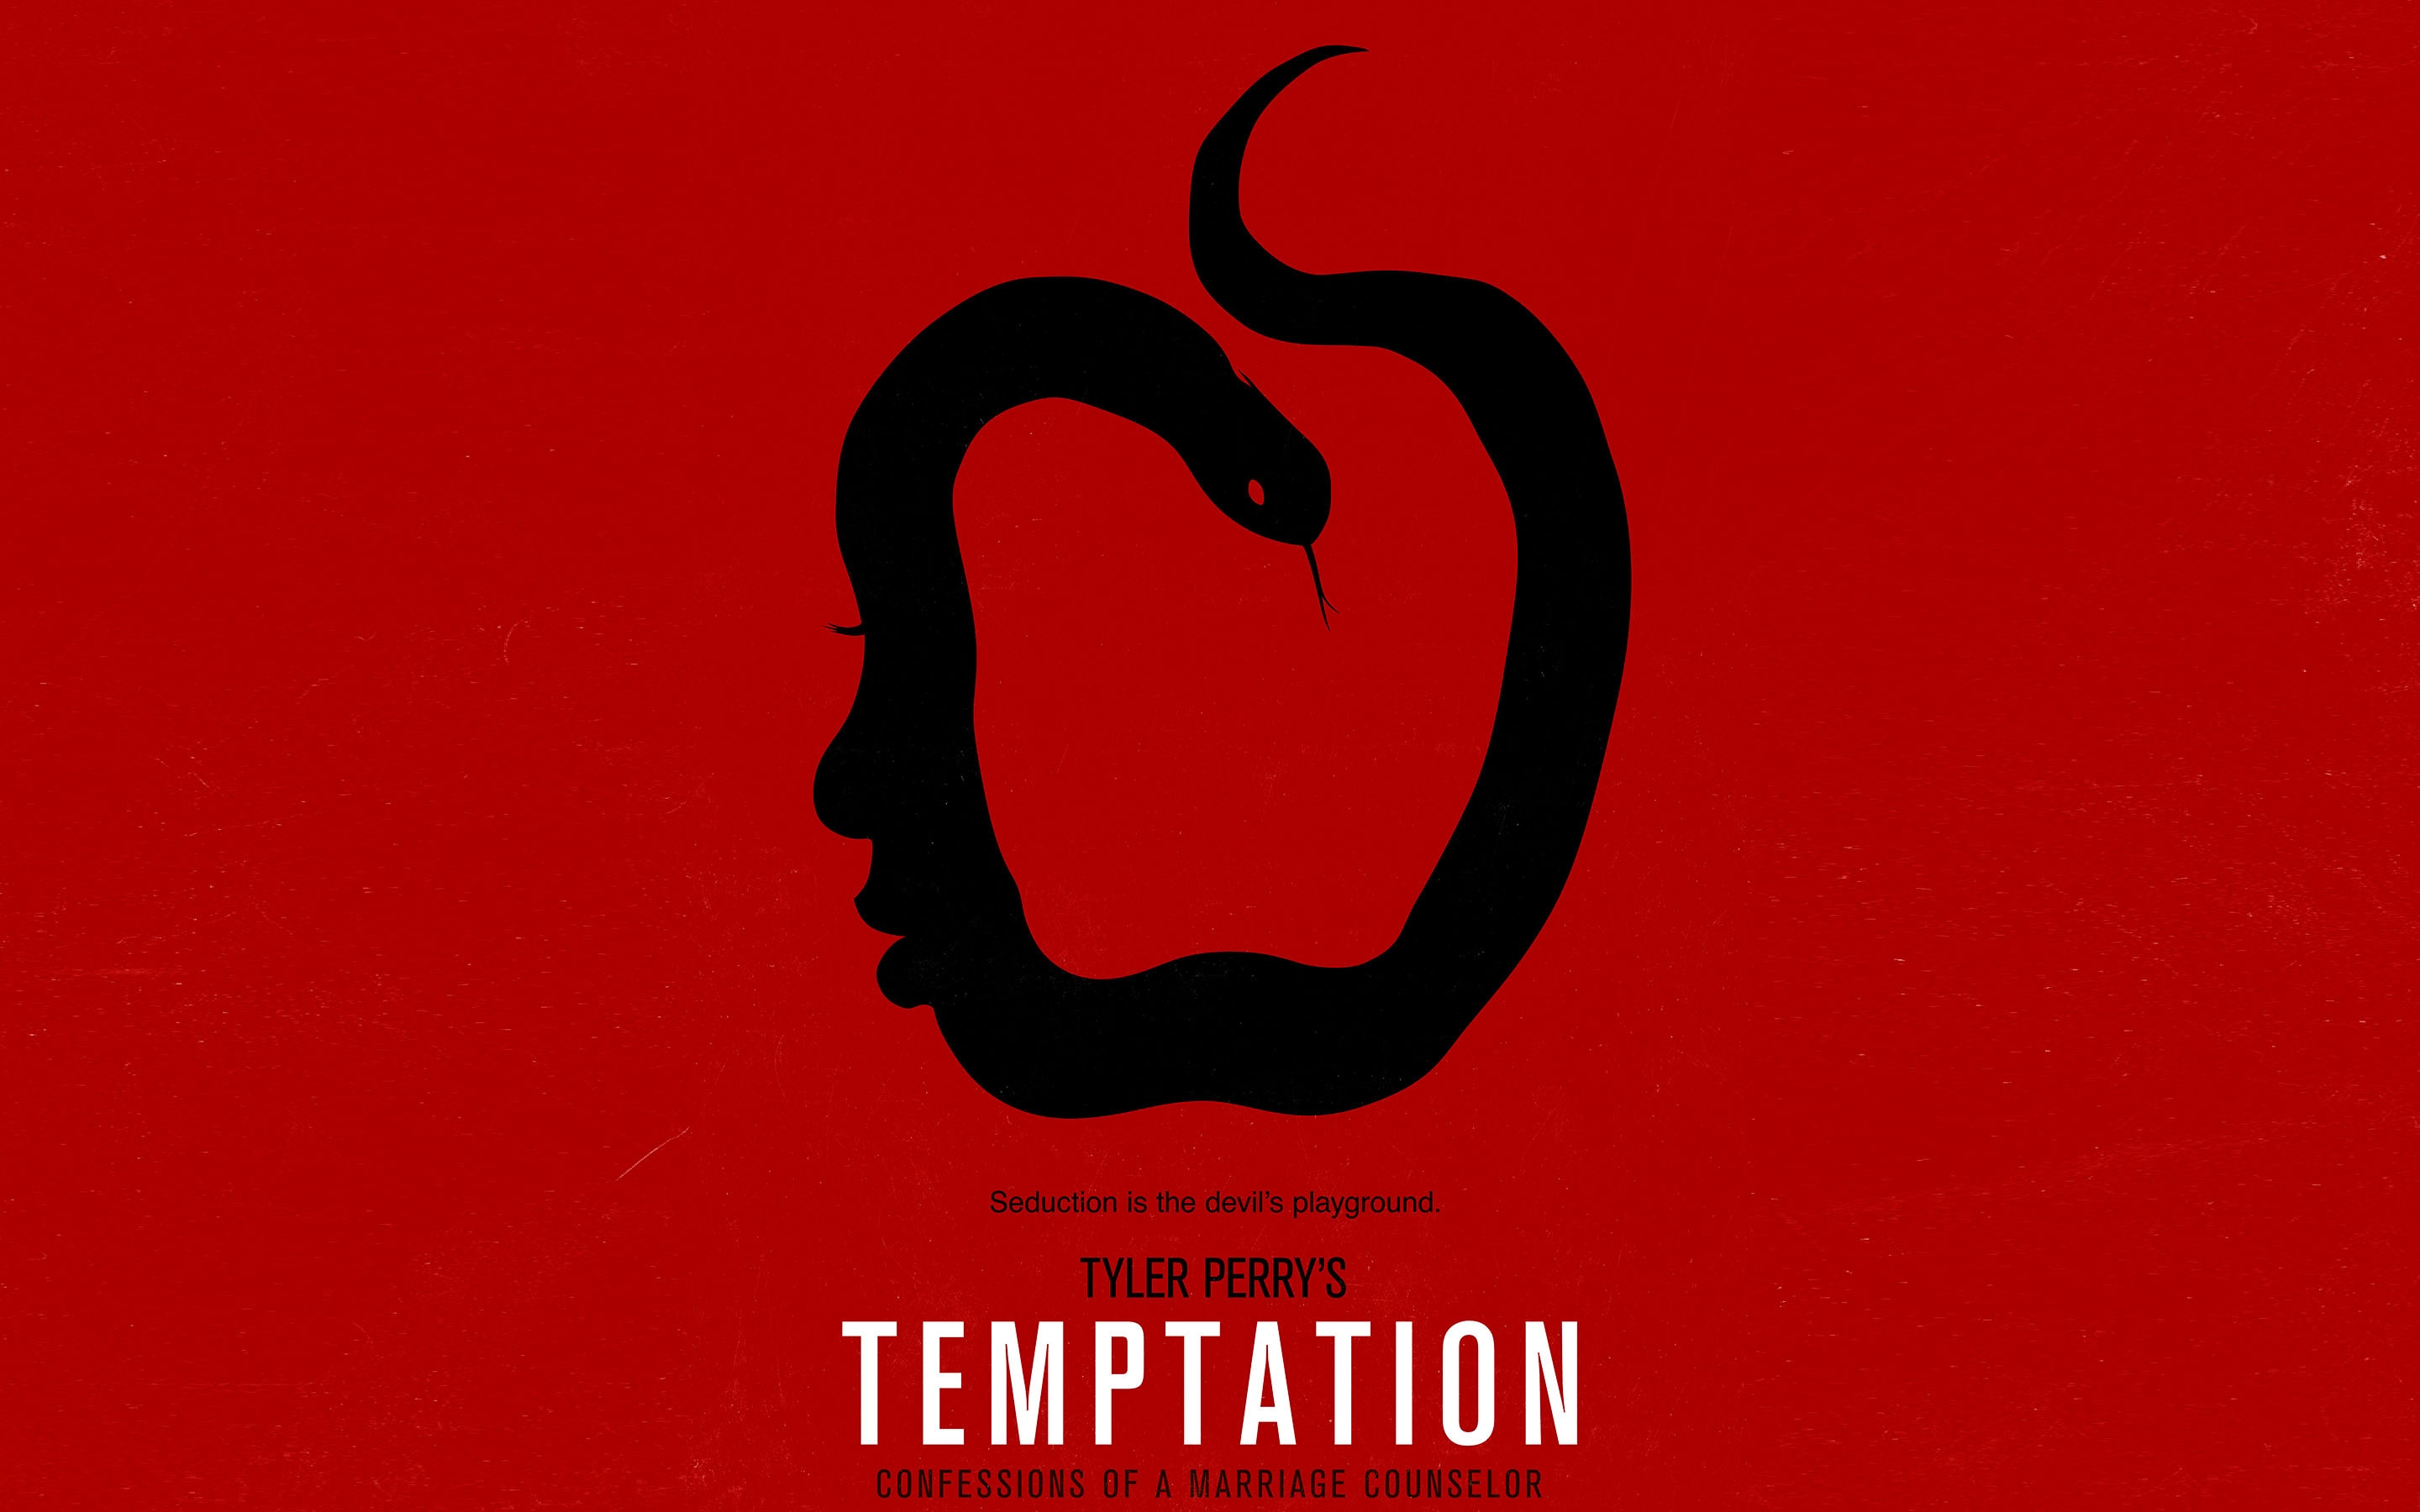 Tyler Perry Temptation for 2880 x 1800 Retina Display resolution